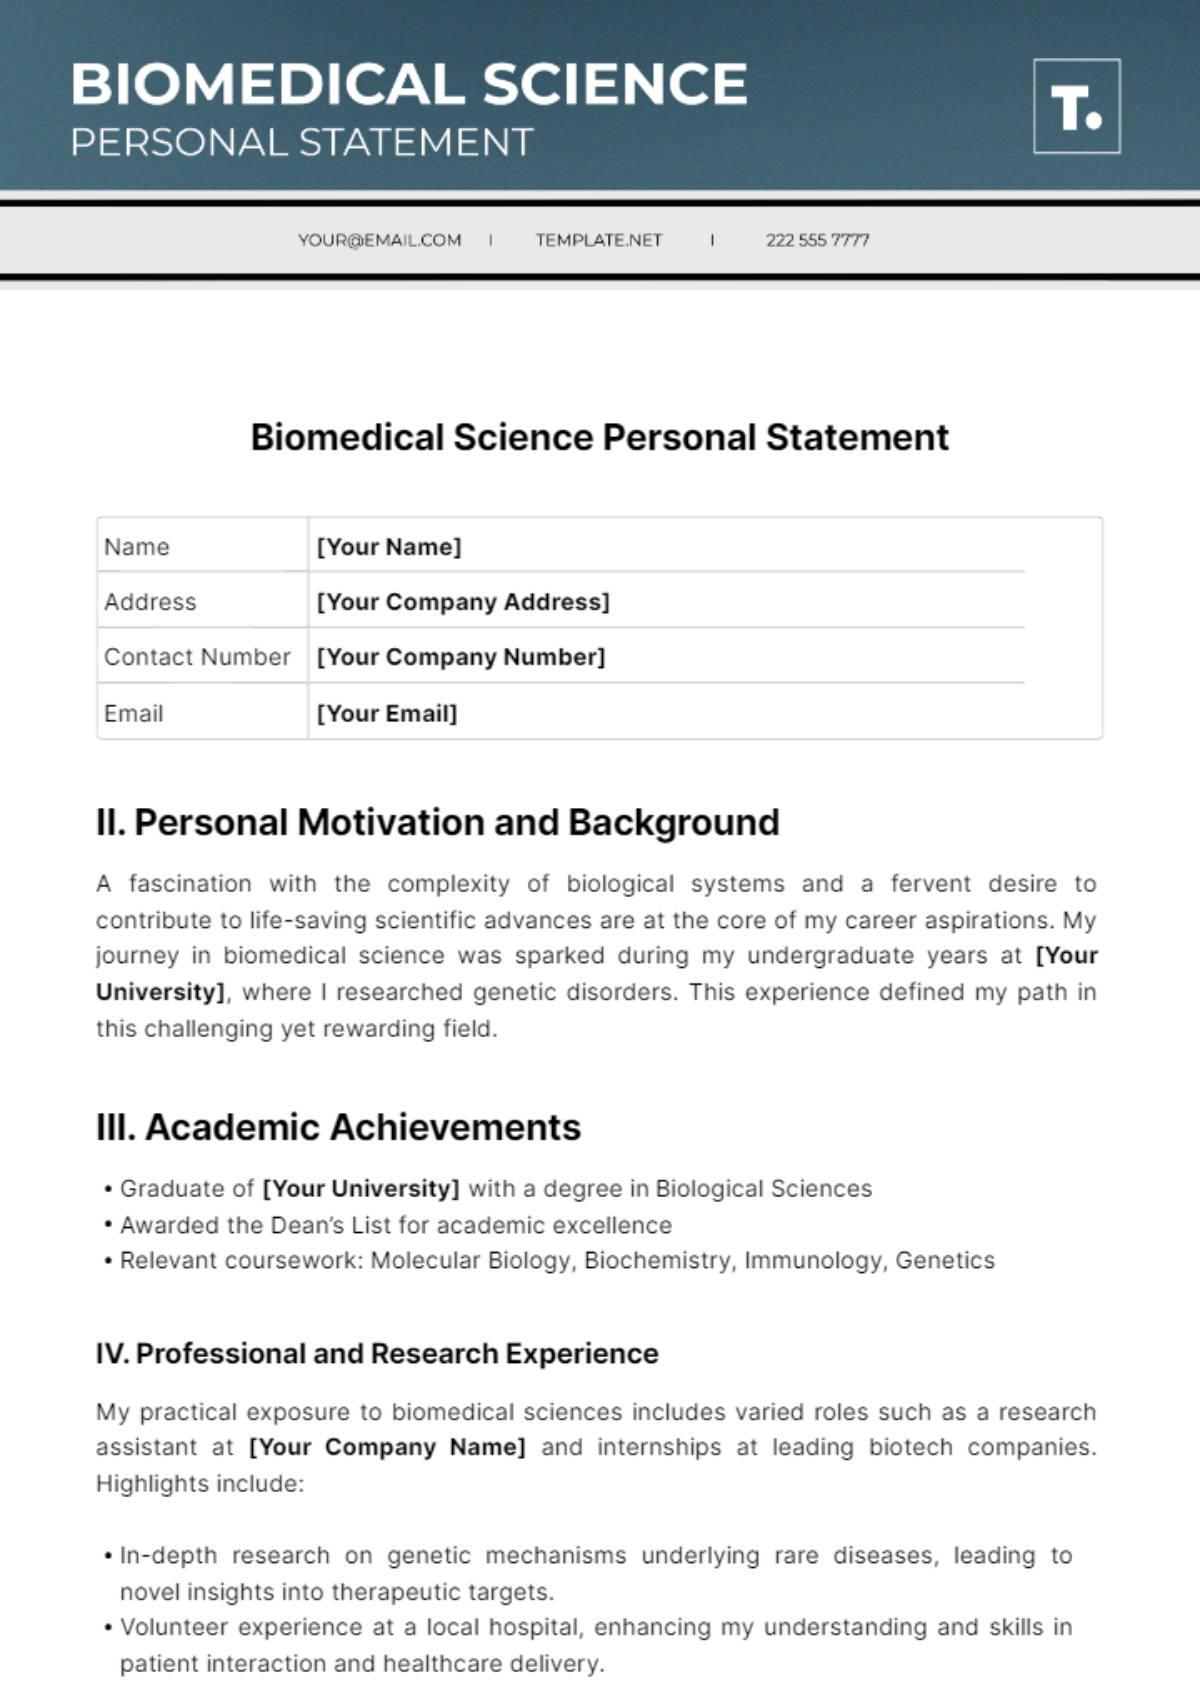 Biomedical Science Personal Statement Template